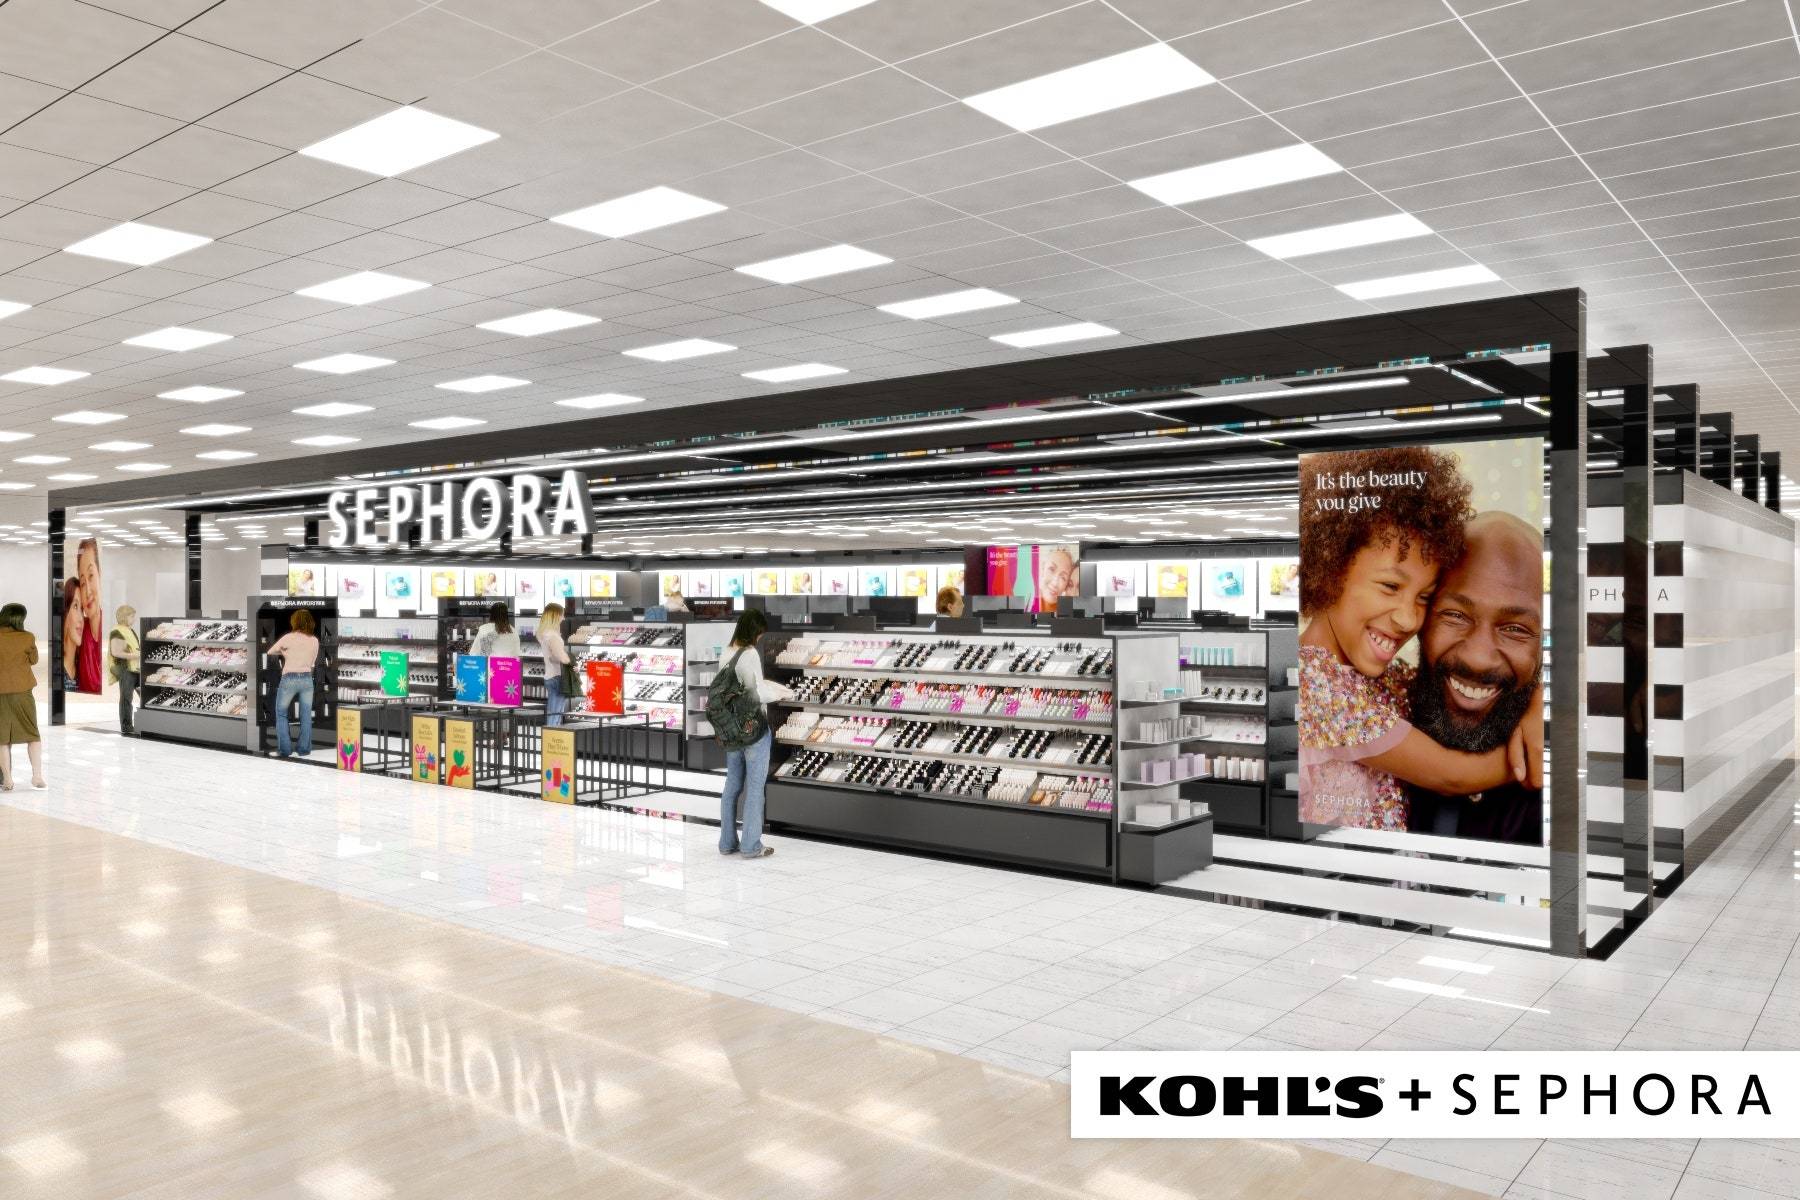 An example of a Sephora display inside a Kohl's.